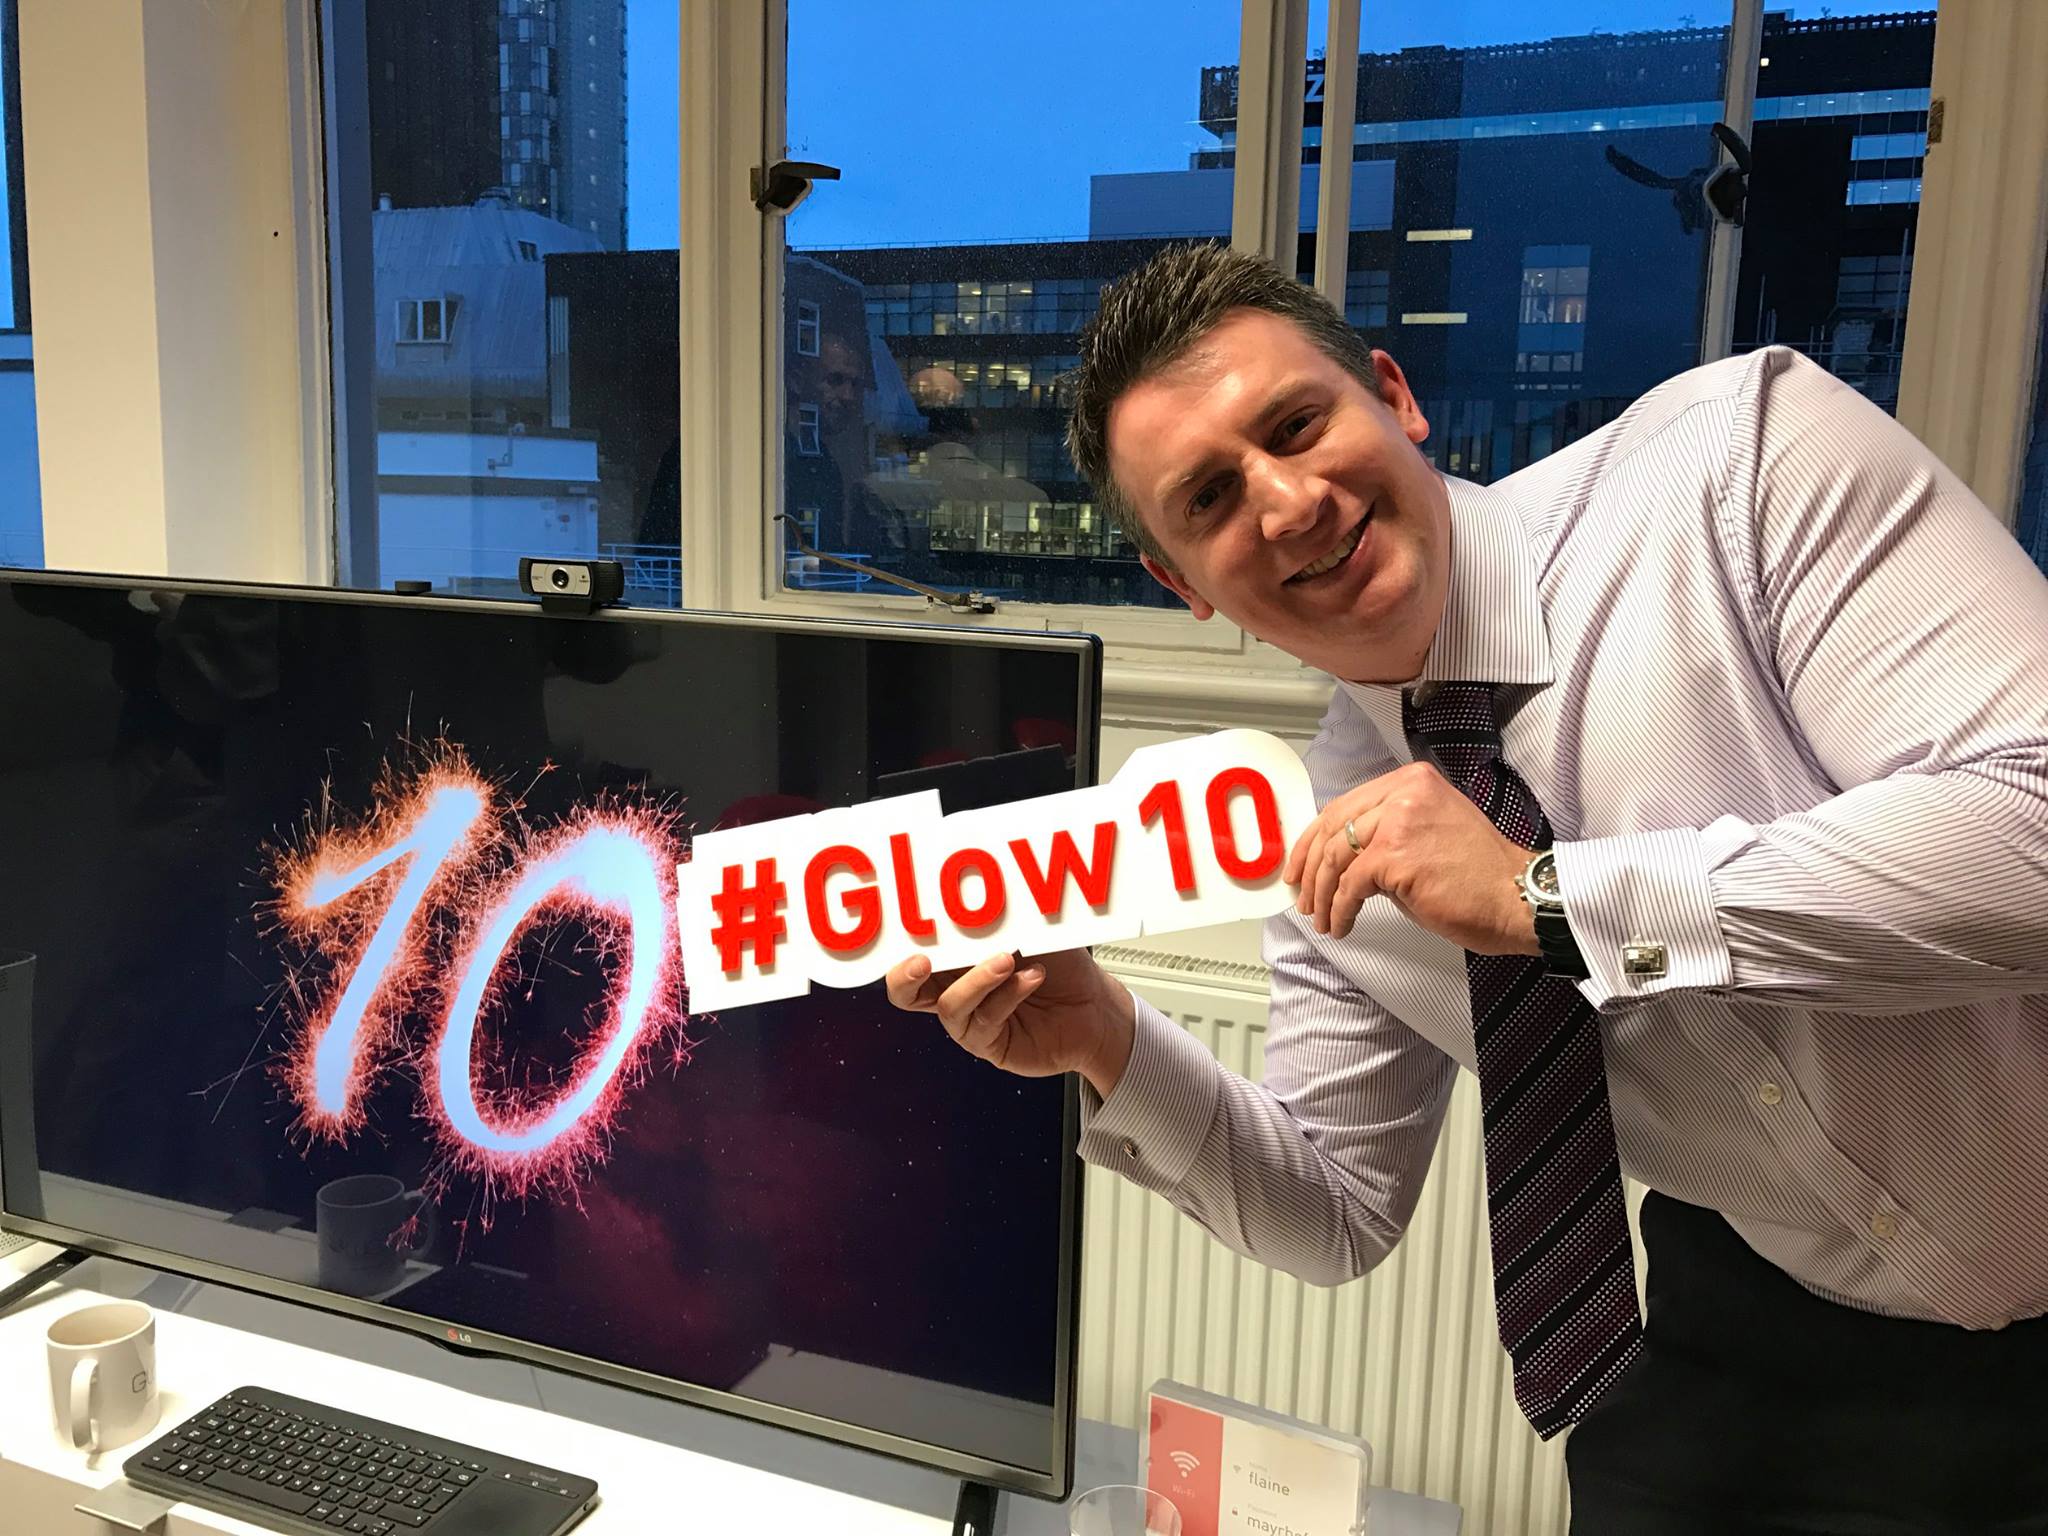 Posing with a glow10 sign